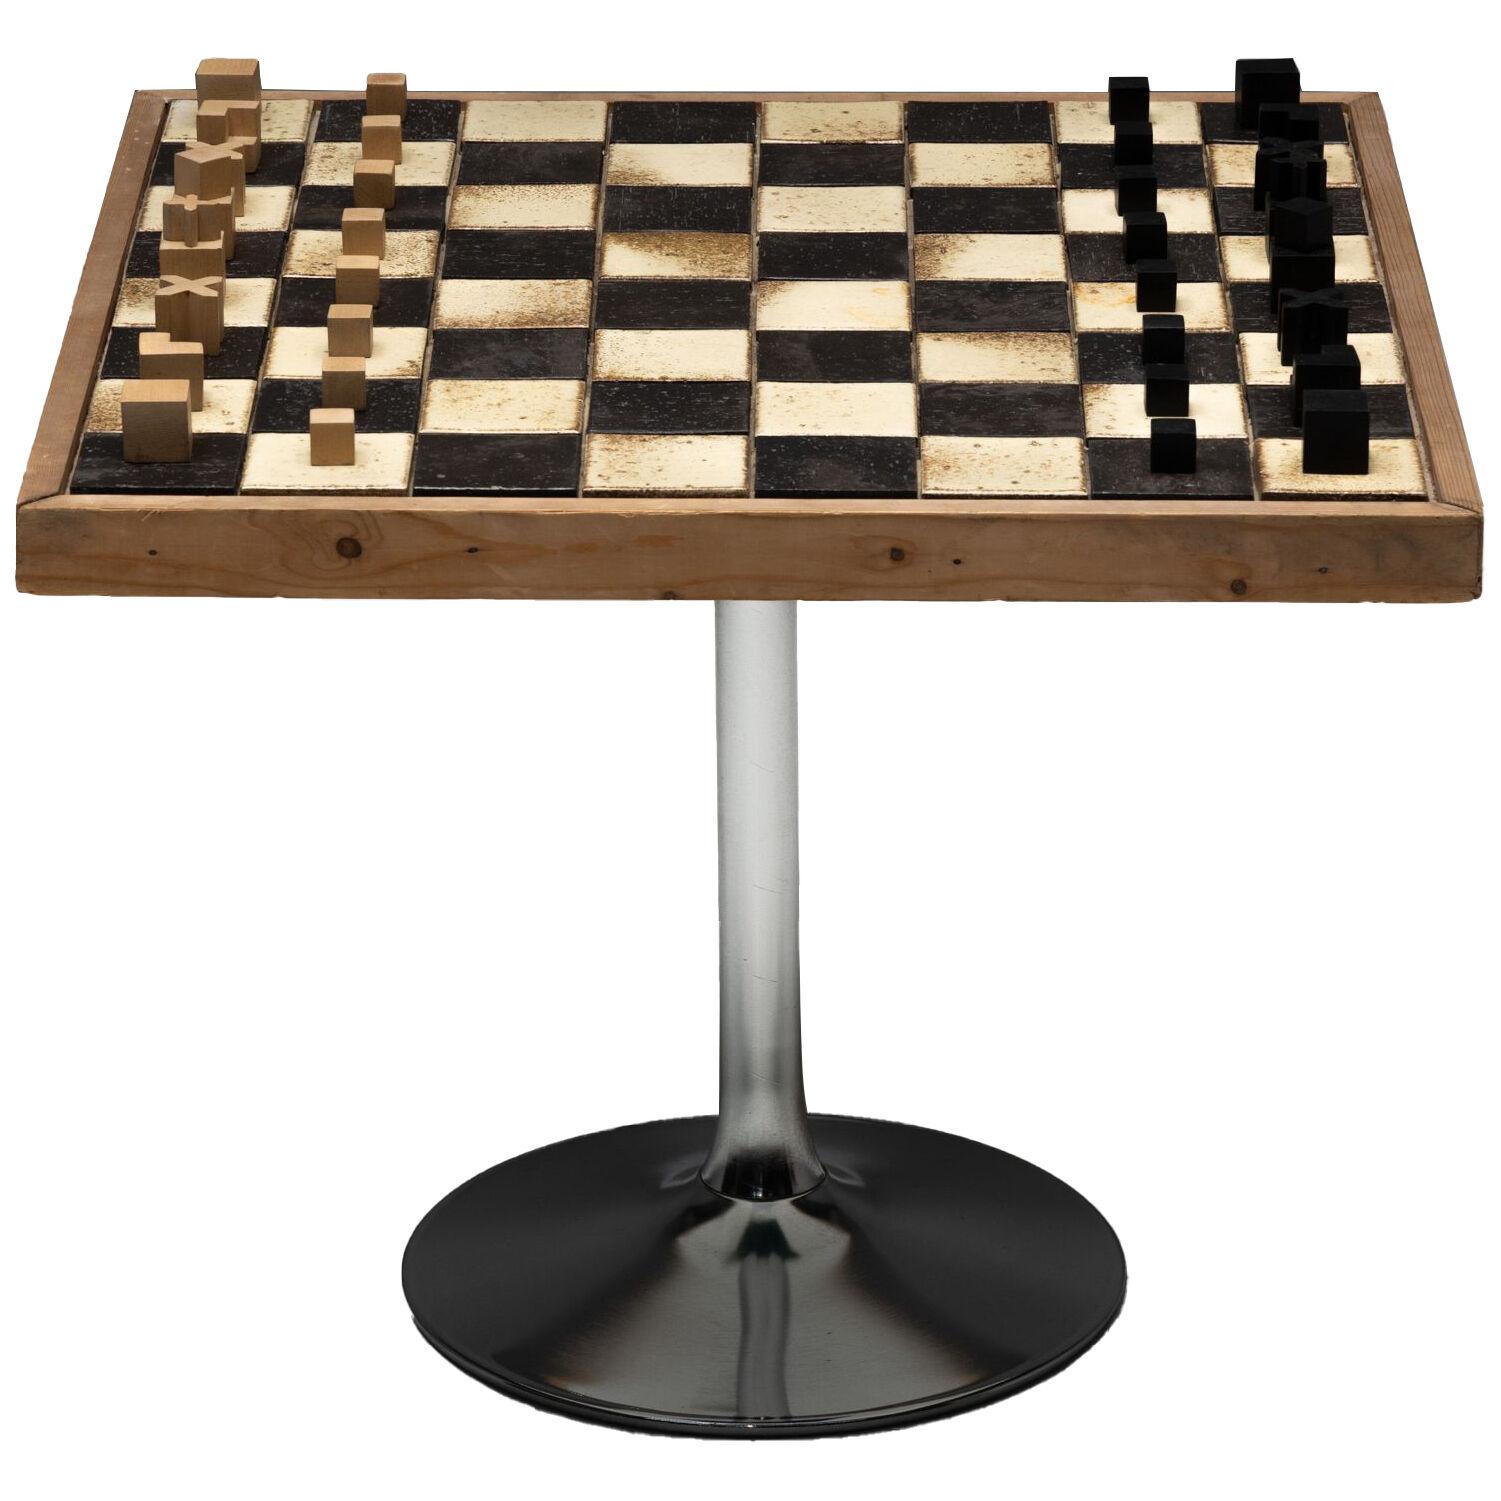 Game Table with Bauhaus Chess Set by Josef Hartwig, 1924